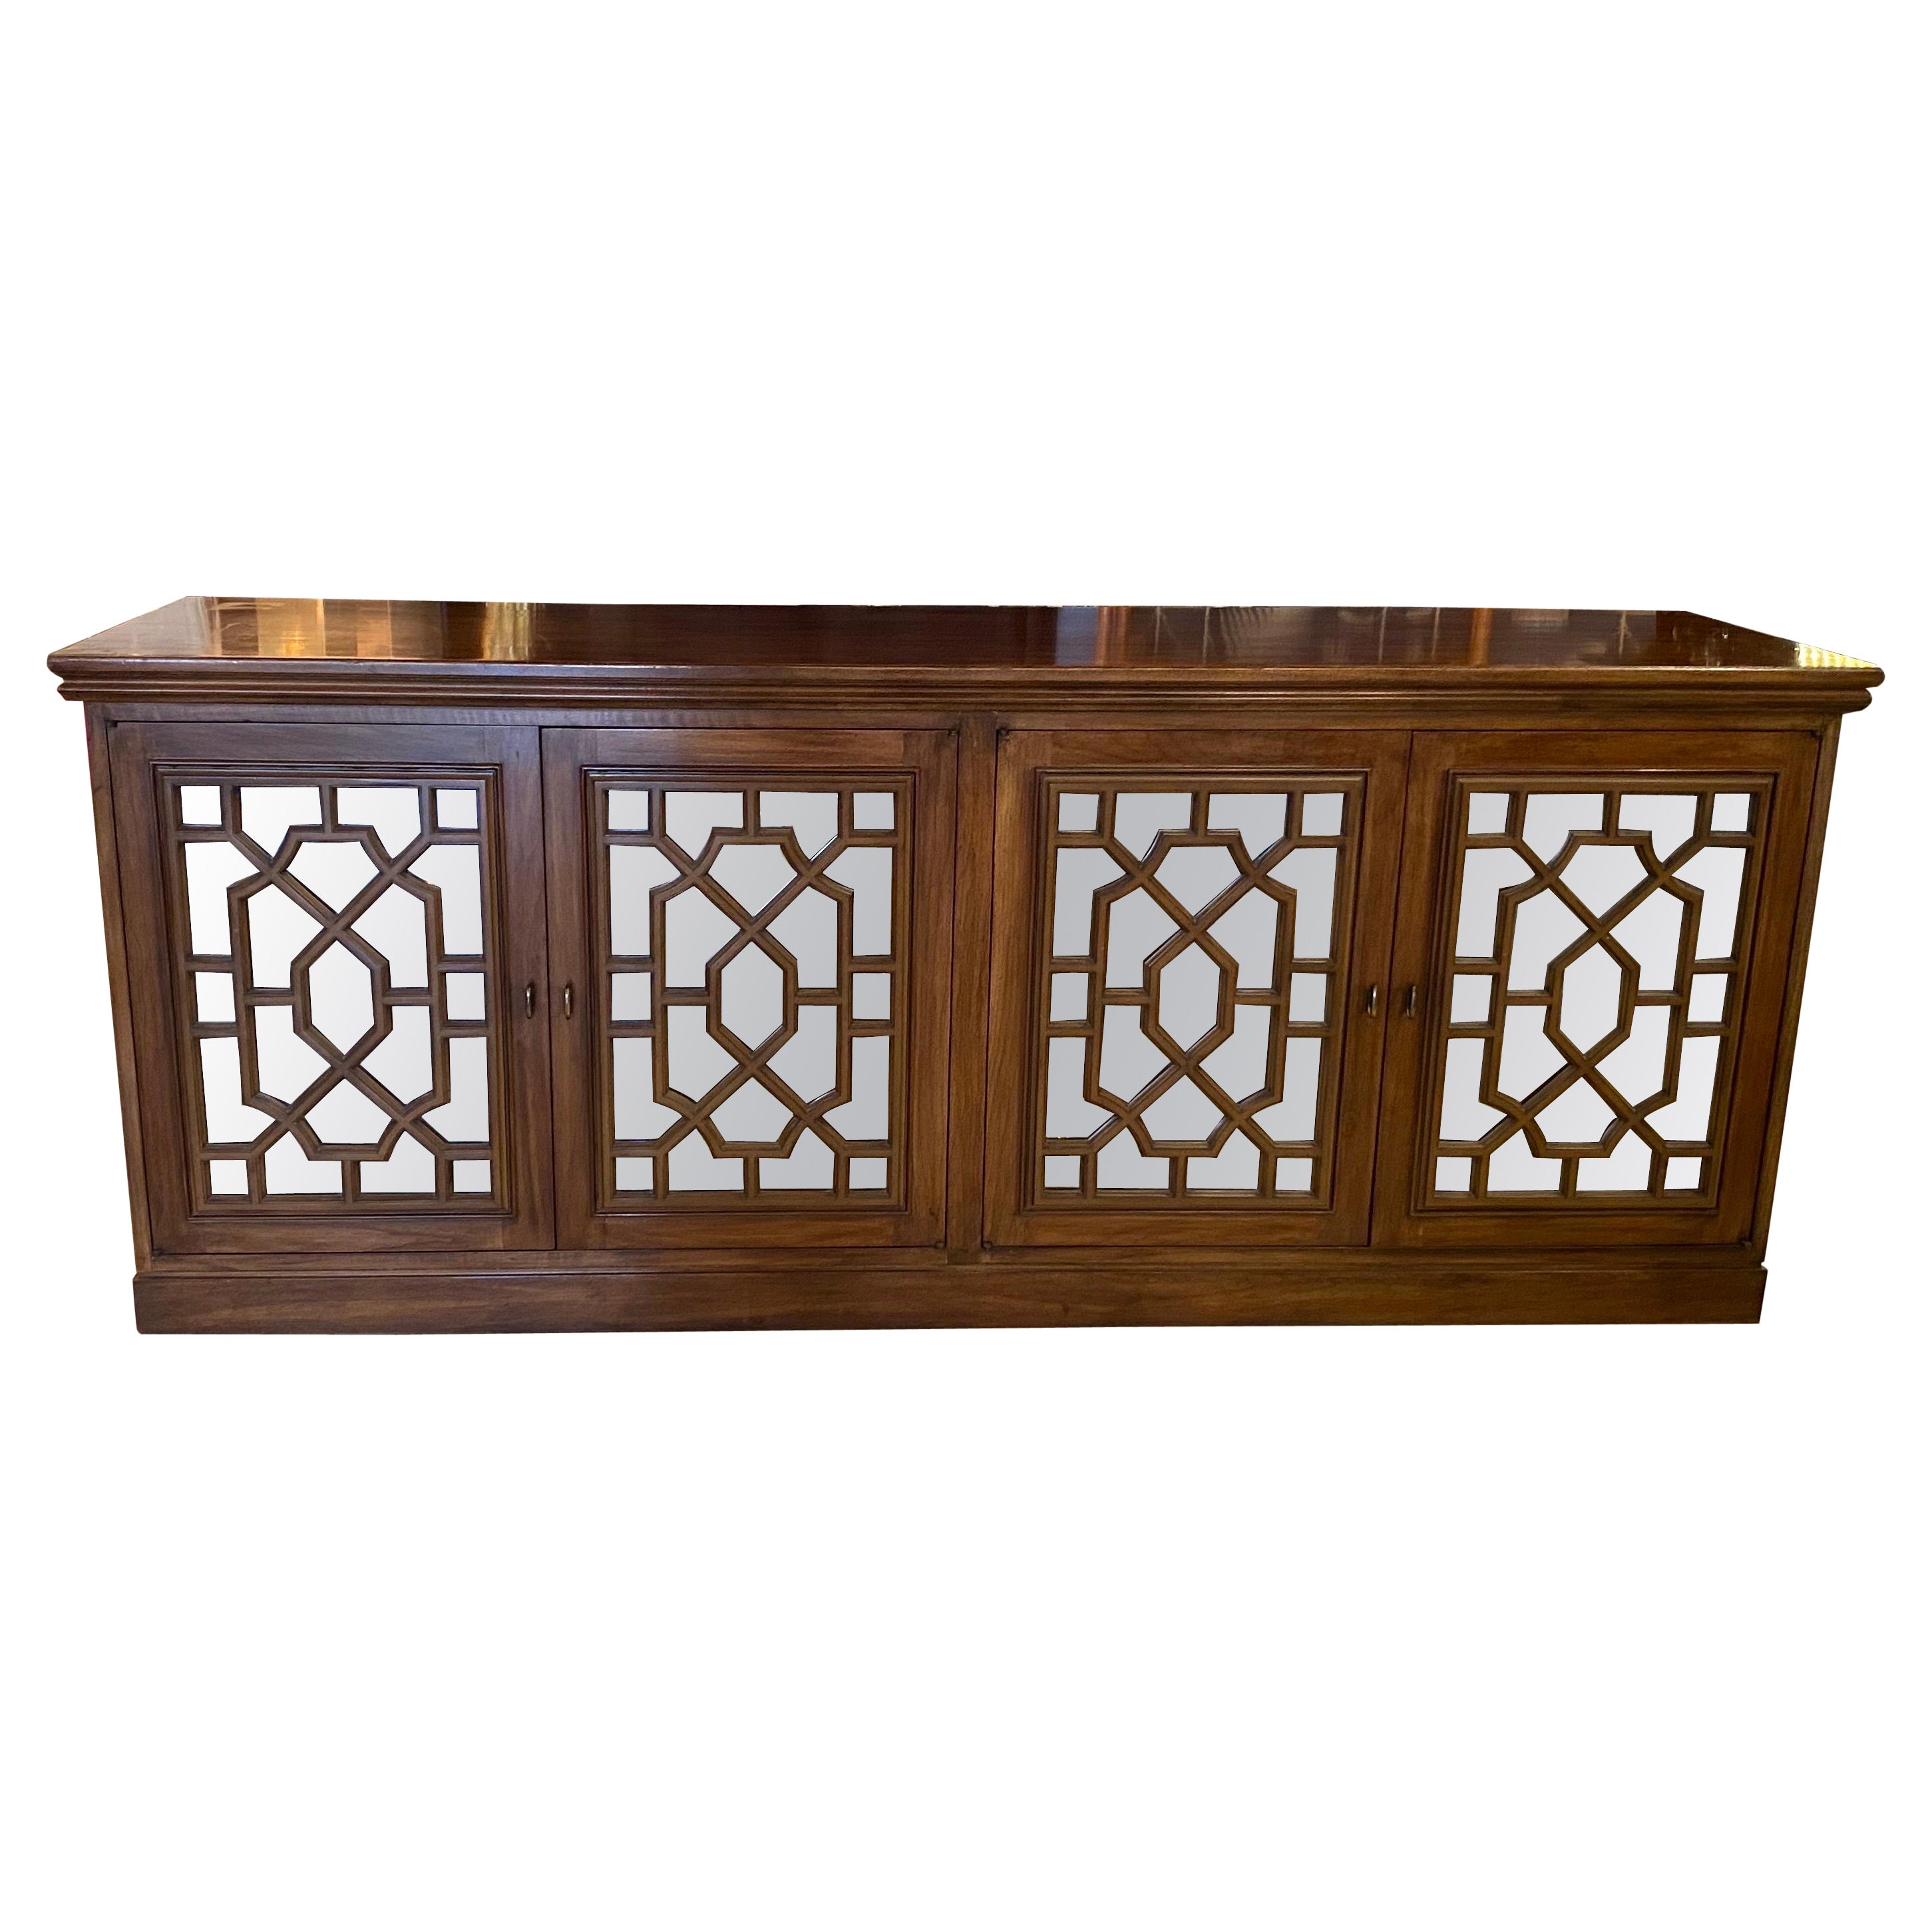 Vintage Wood Chinoiserie Fretwork Fret Mirrored Credenza Buffet Sideboard Doors